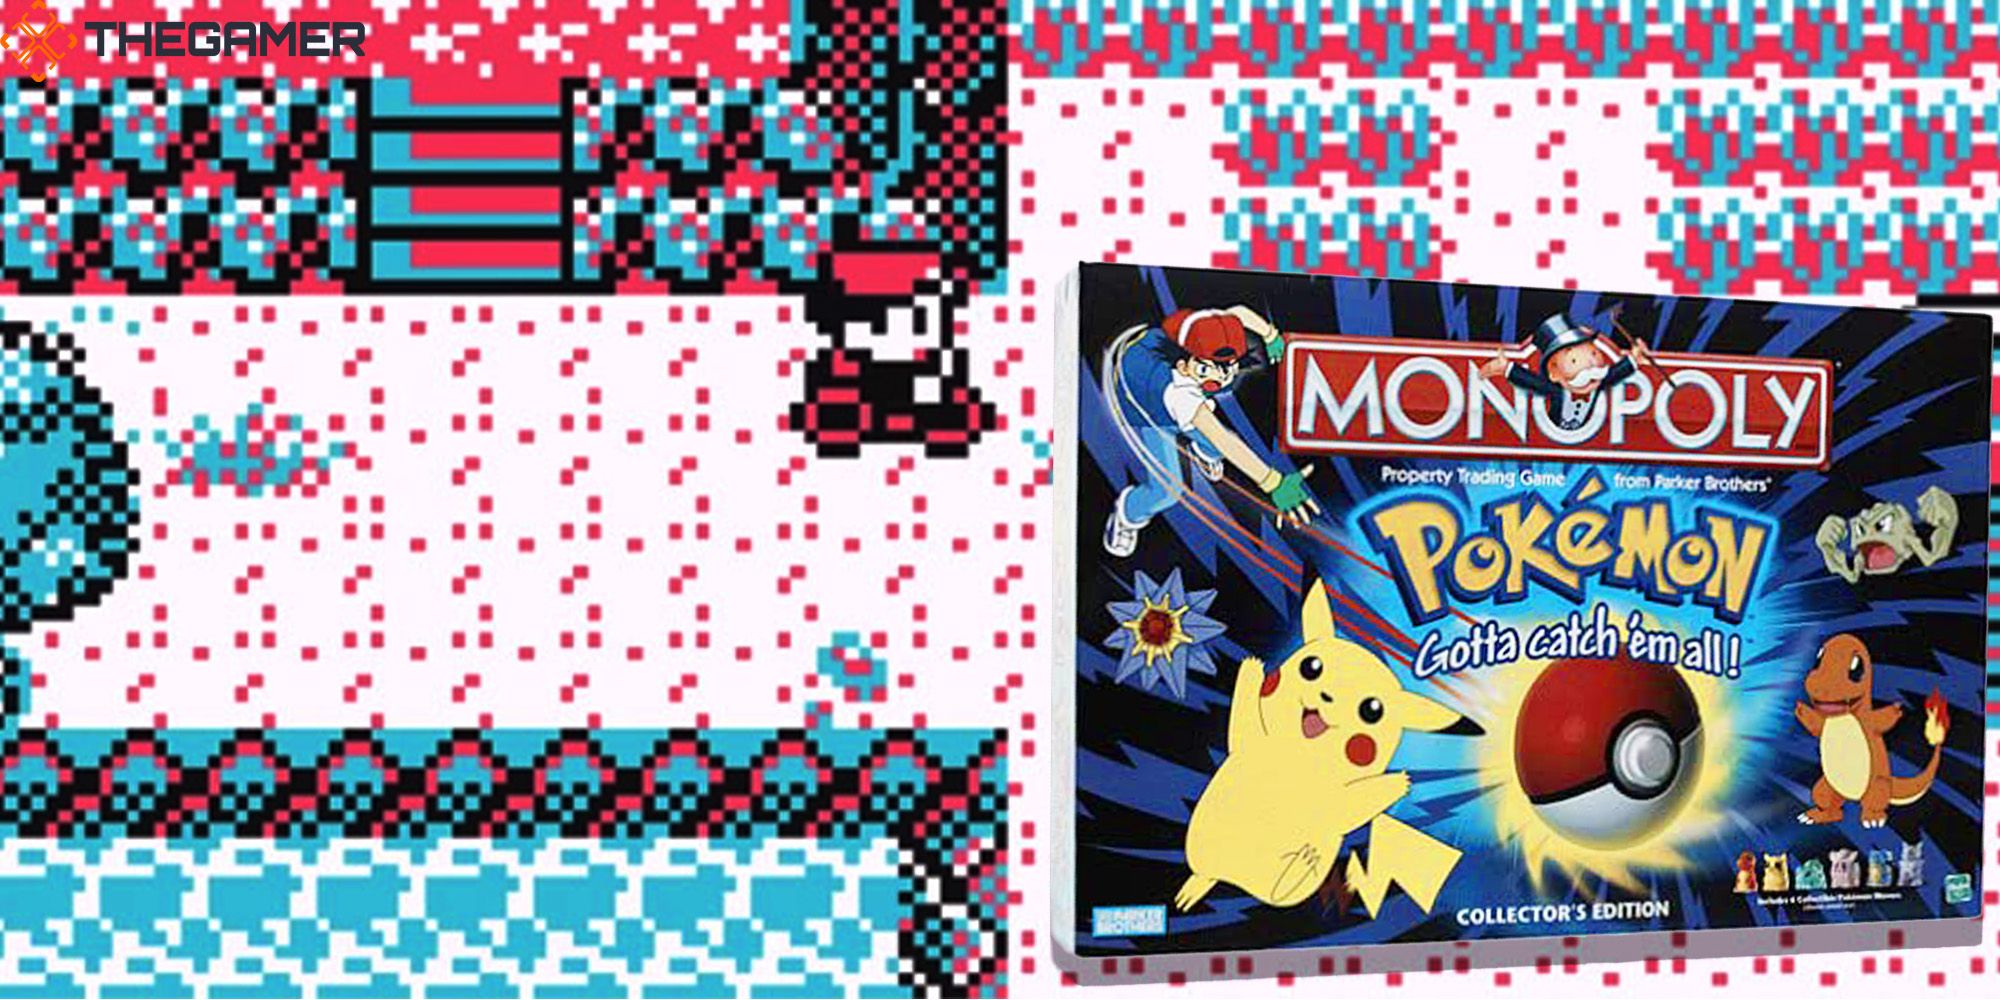 A nineties copy of Pokémon Monopoly in front of a screenshot of a Game Boy-era Pokémon game. Custom image for TG.